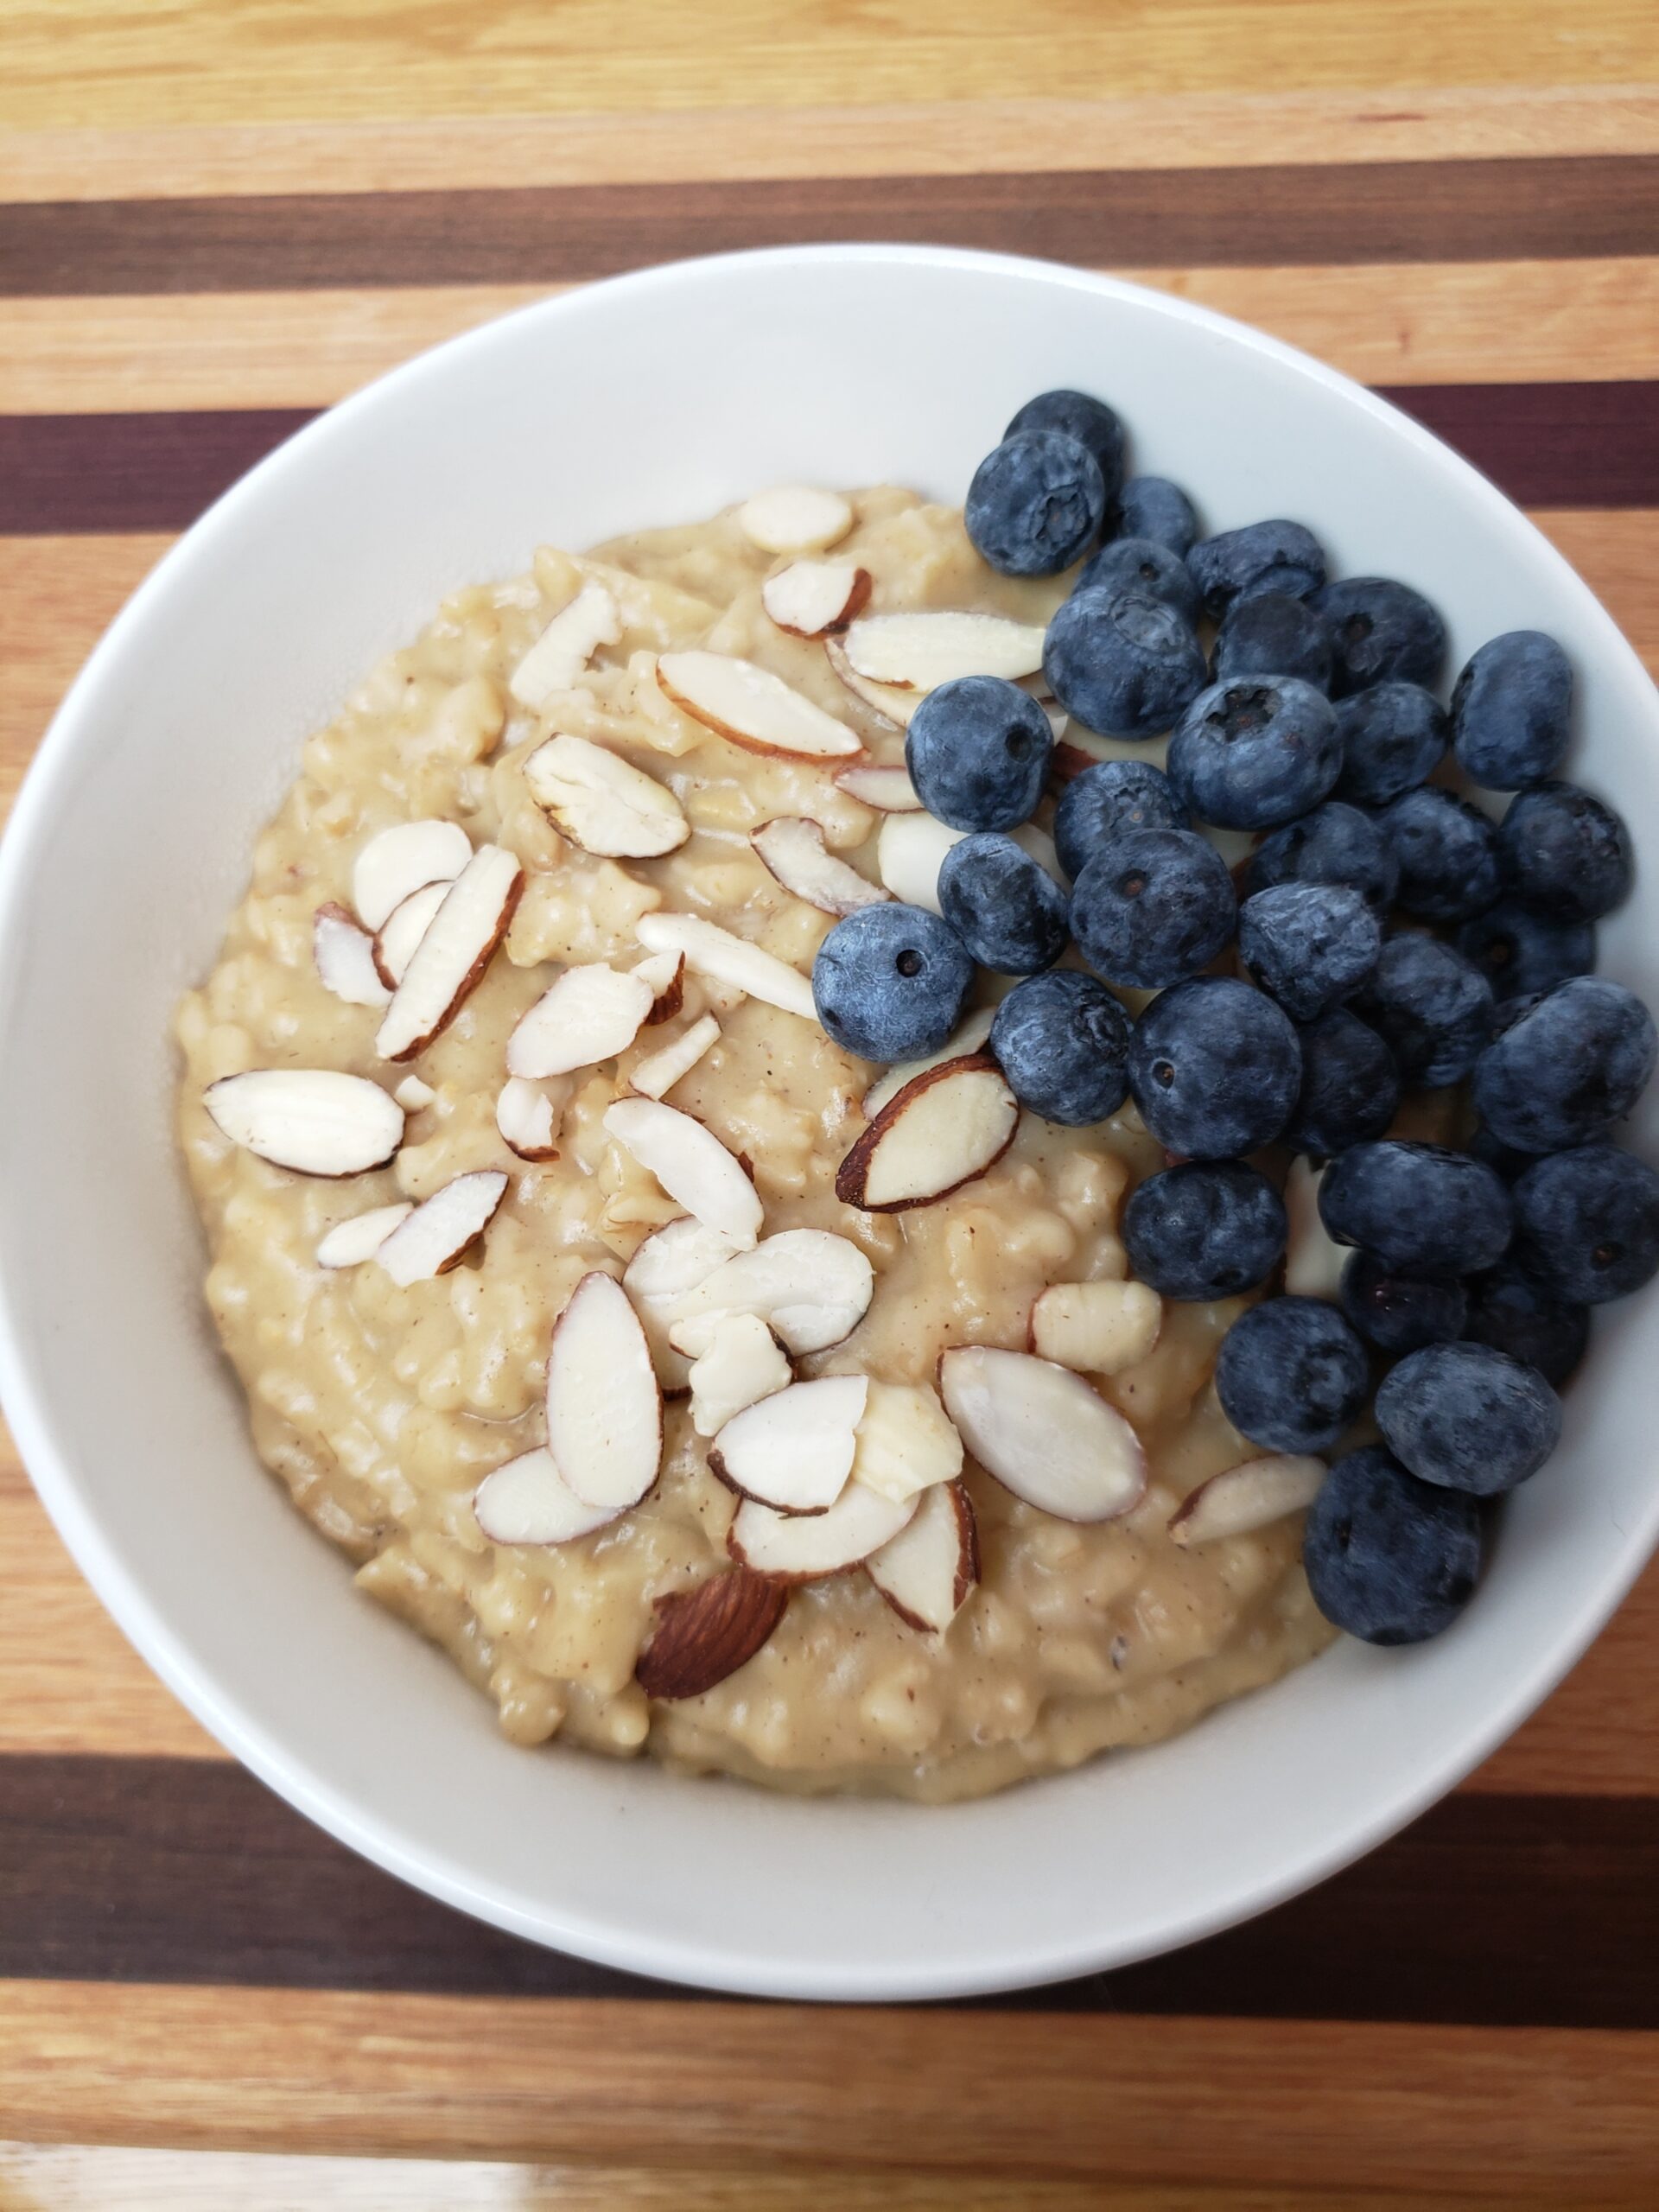 Pumpkin Pie Oatmeal served with sliced almonds and blueberries in a white bowl.